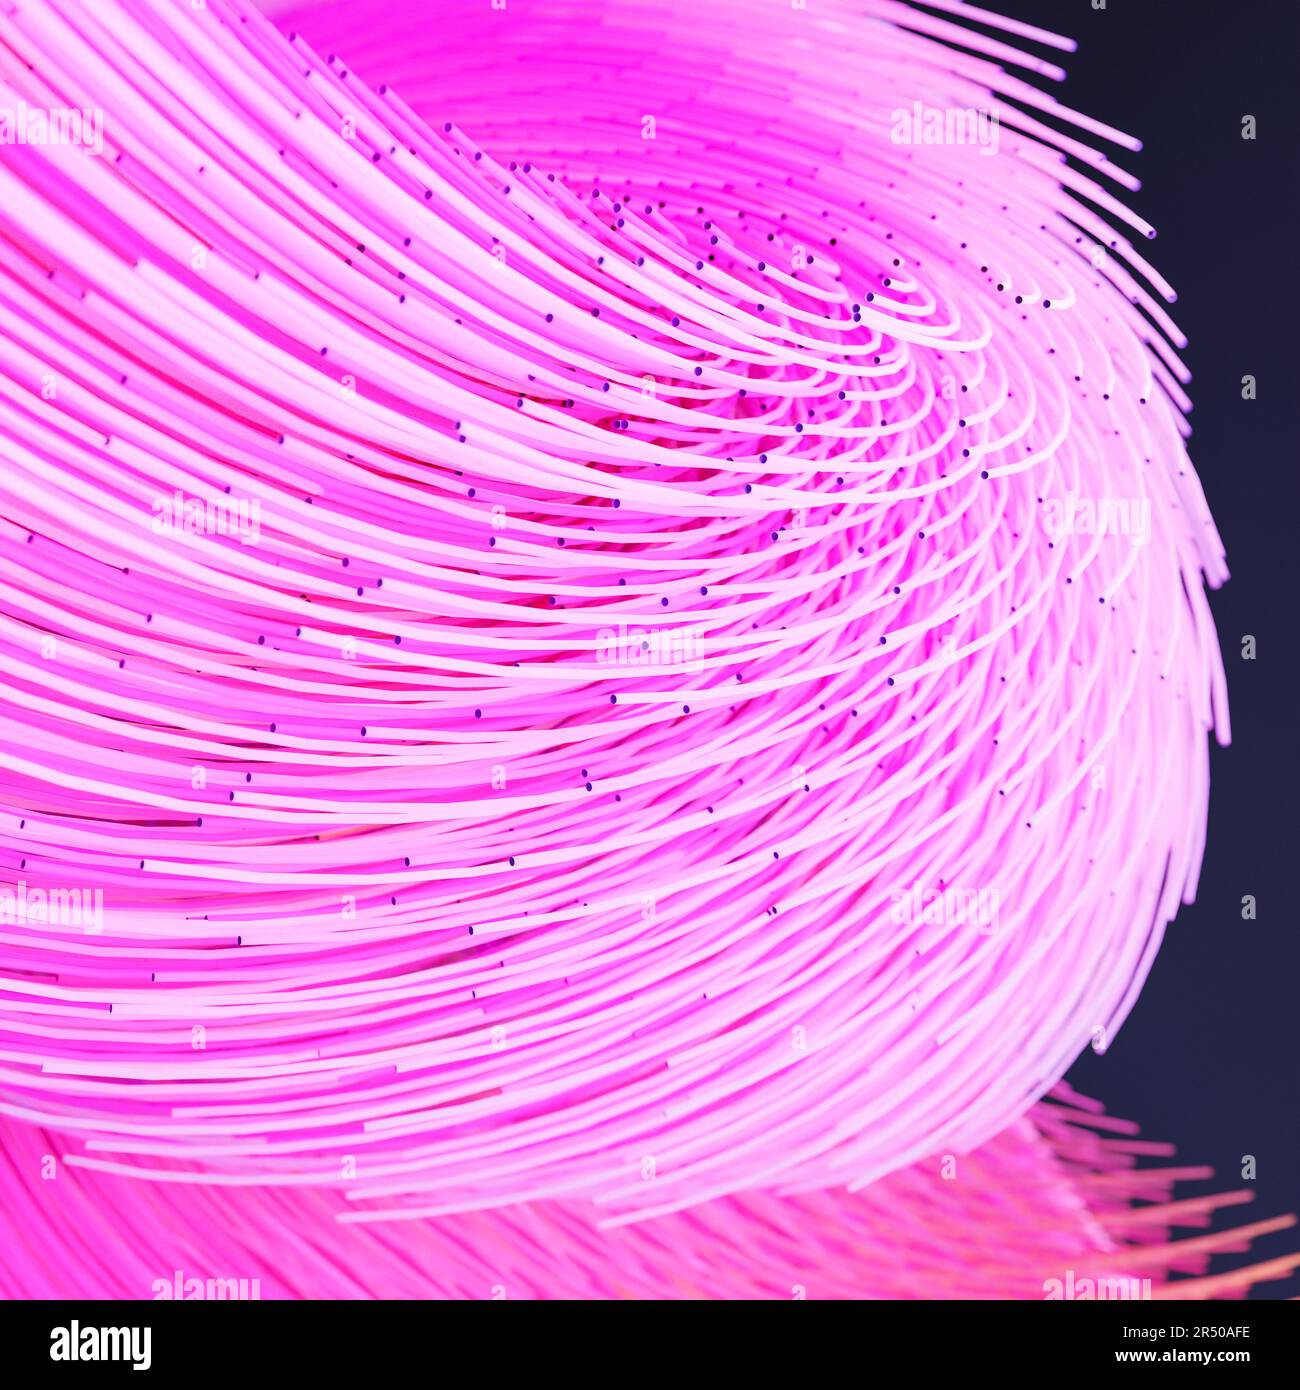 Pink spaghetti 3D render abstract background. Futuristic colorful tentacles cyber illustration Stock Photo